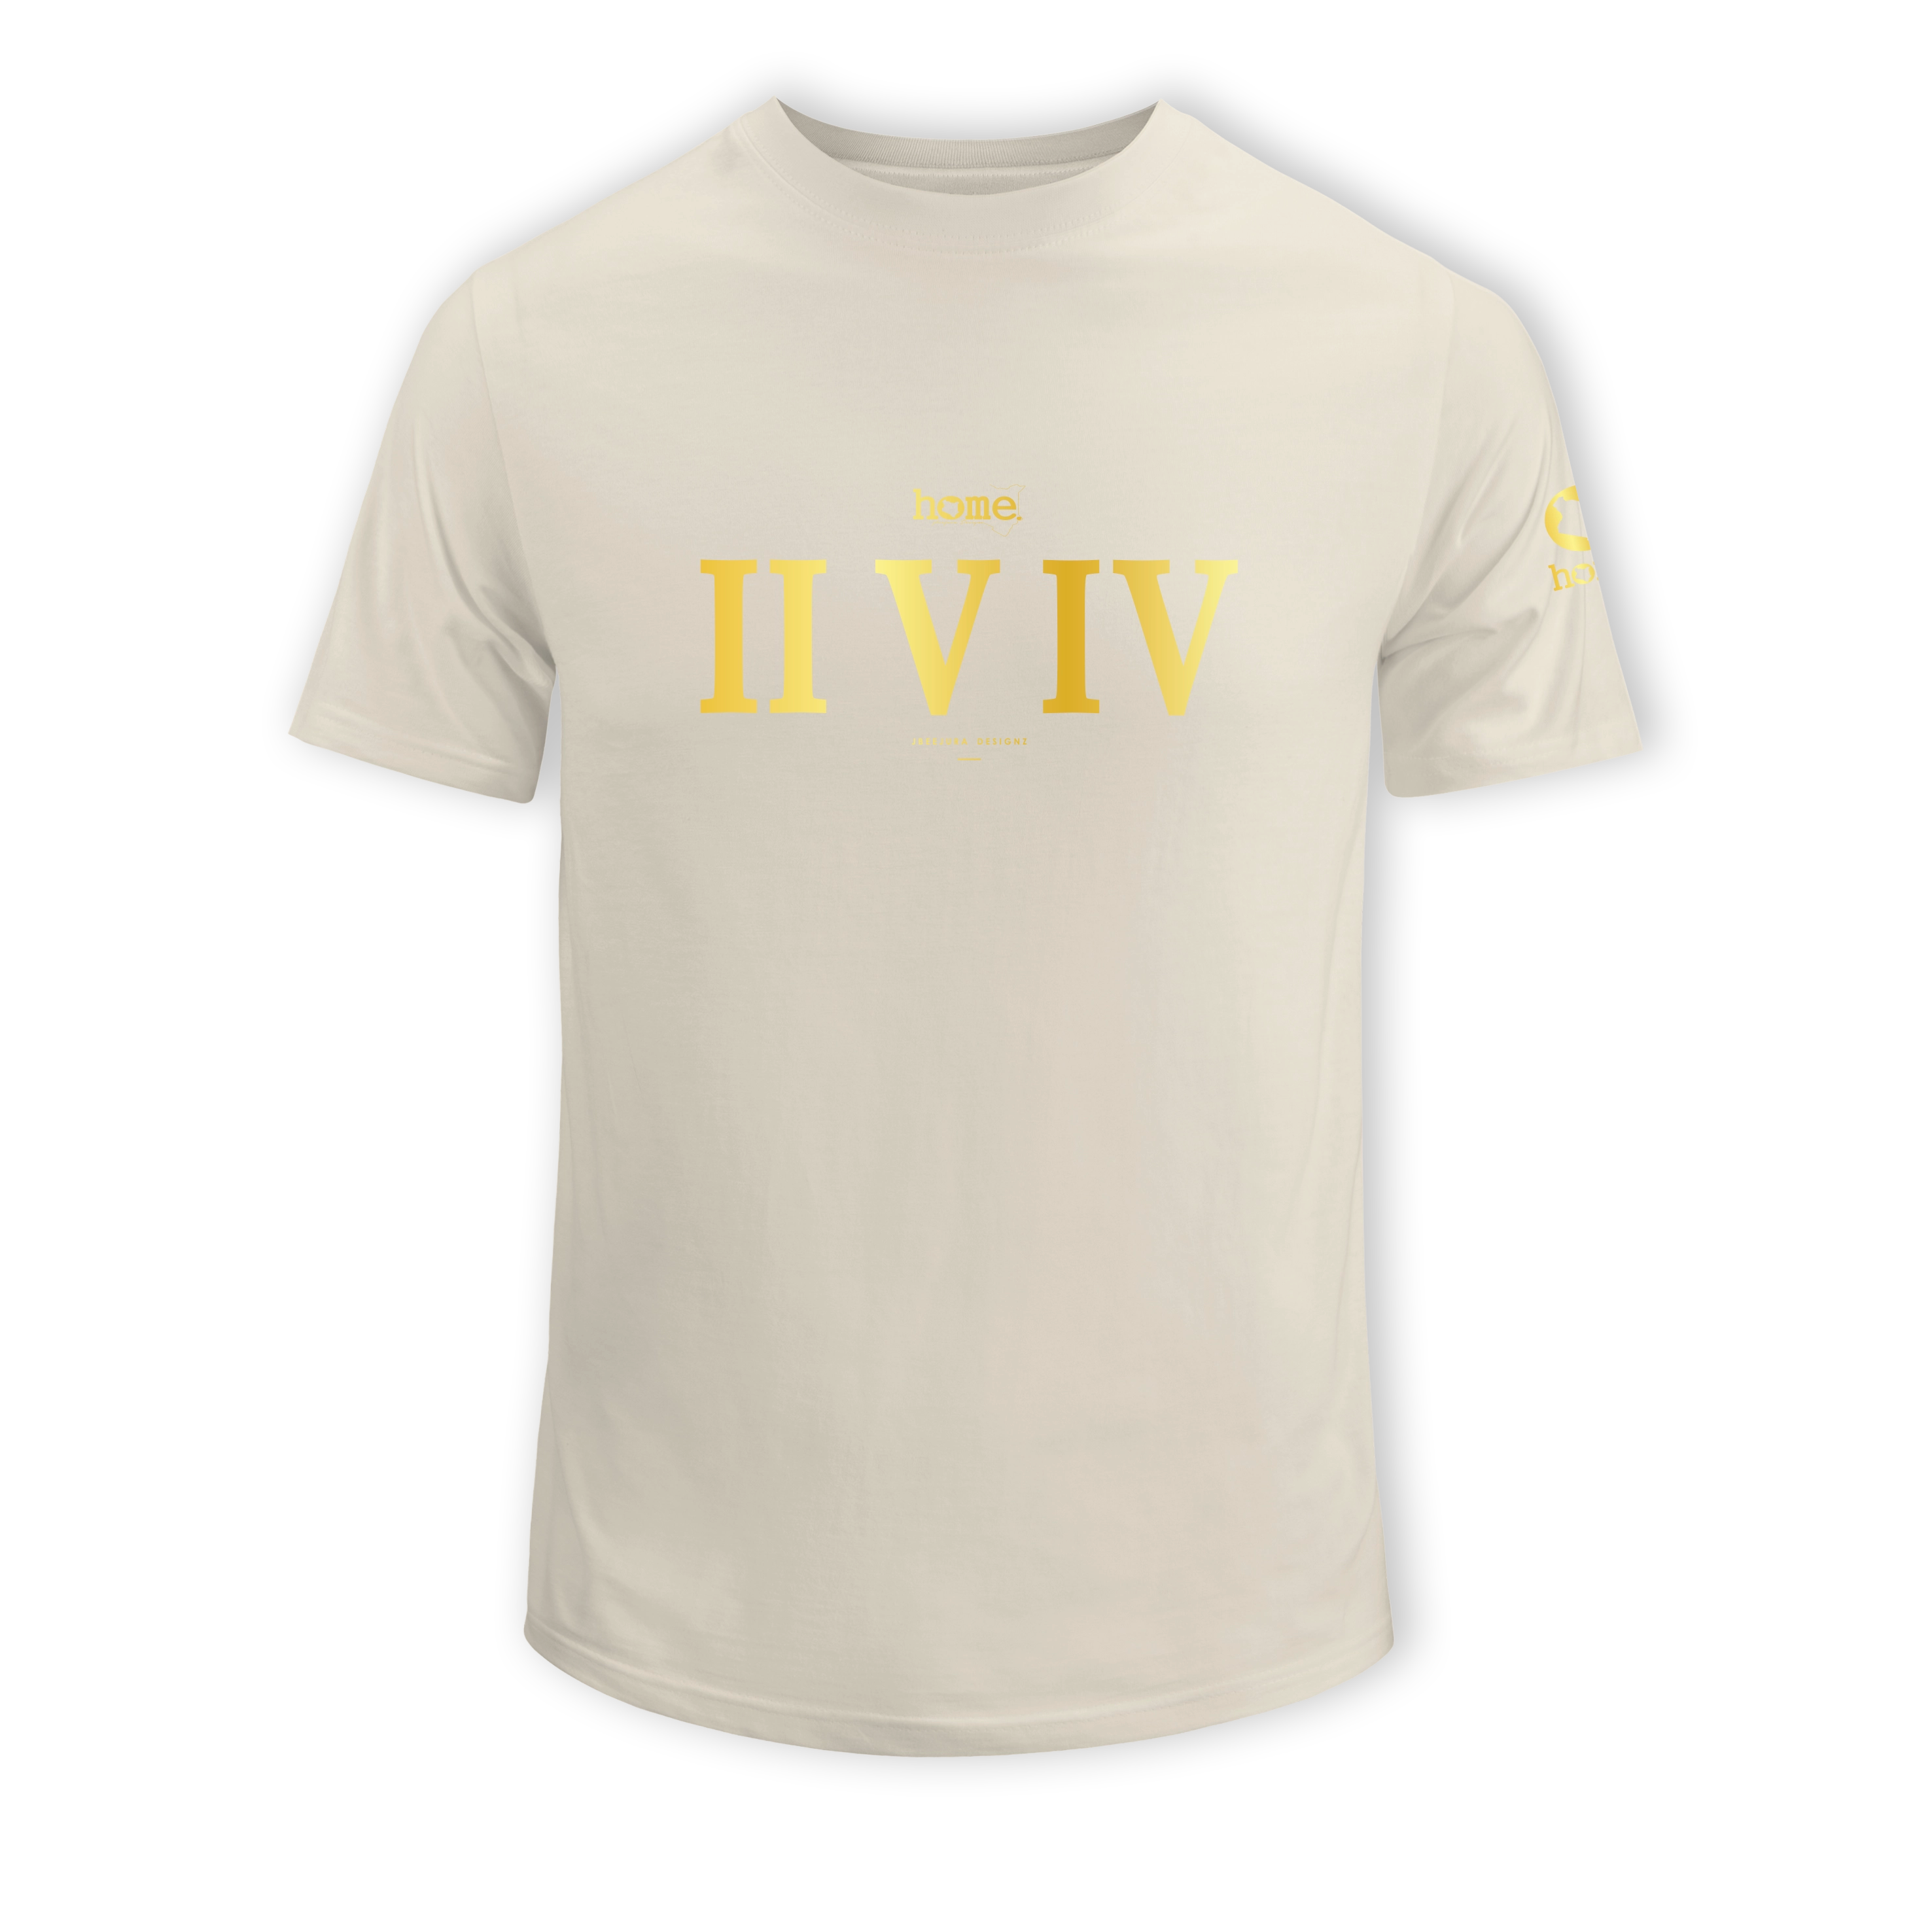 home_254 SHORT-SLEEVED NUDE T-SHIRT WITH A GOLD ROMAN NUMERALS PRINT – COTTON PLUS FABRIC